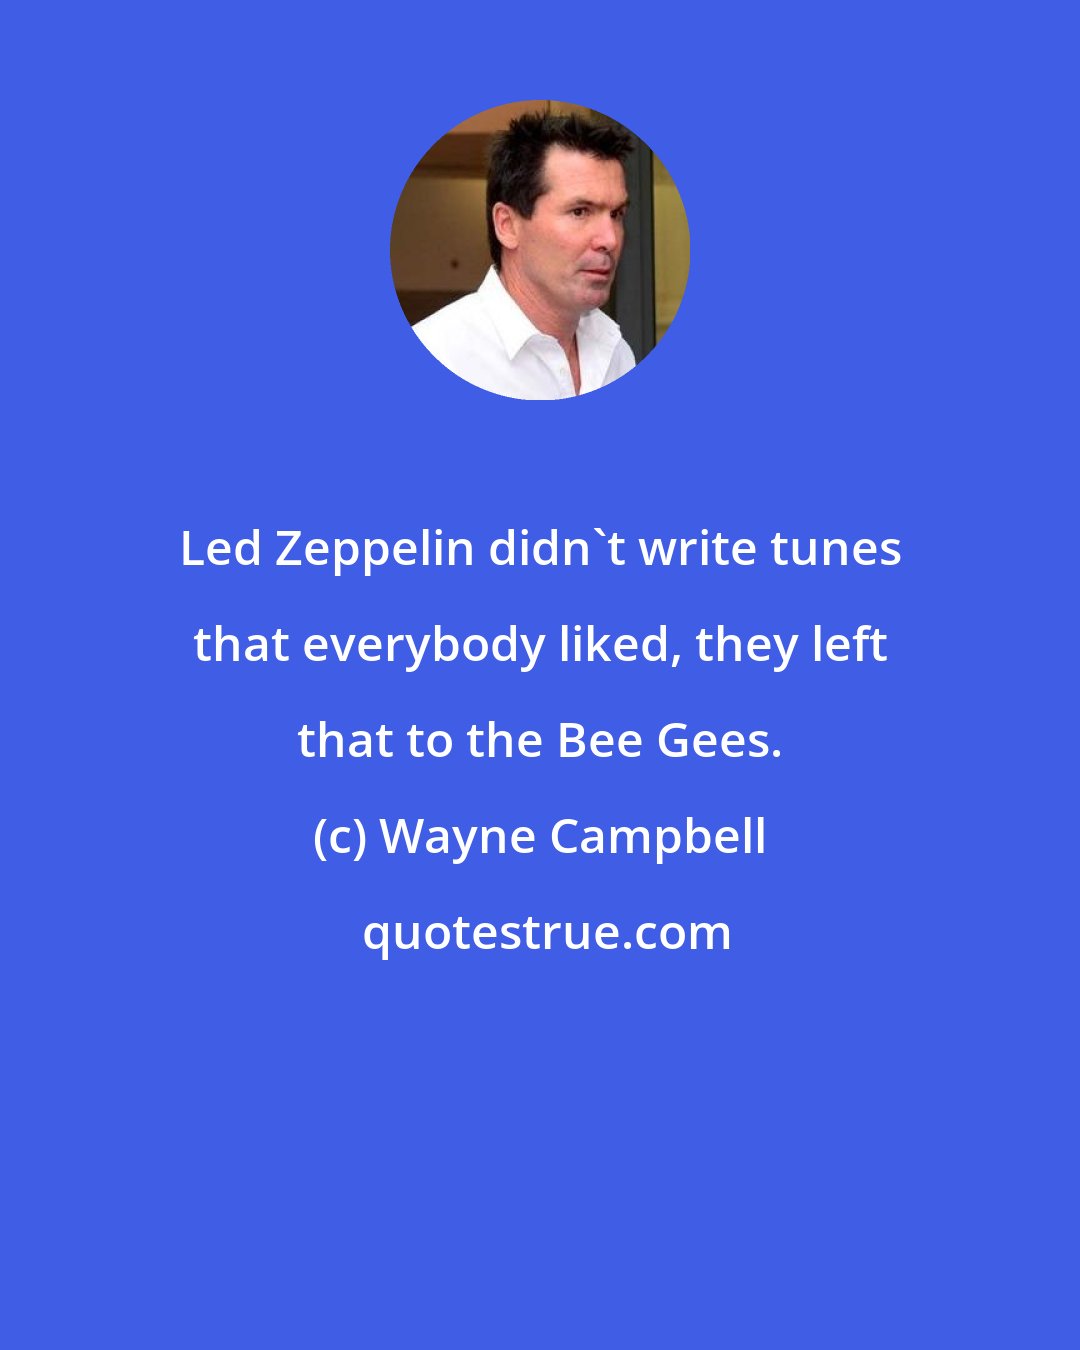 Wayne Campbell: Led Zeppelin didn't write tunes that everybody liked, they left that to the Bee Gees.